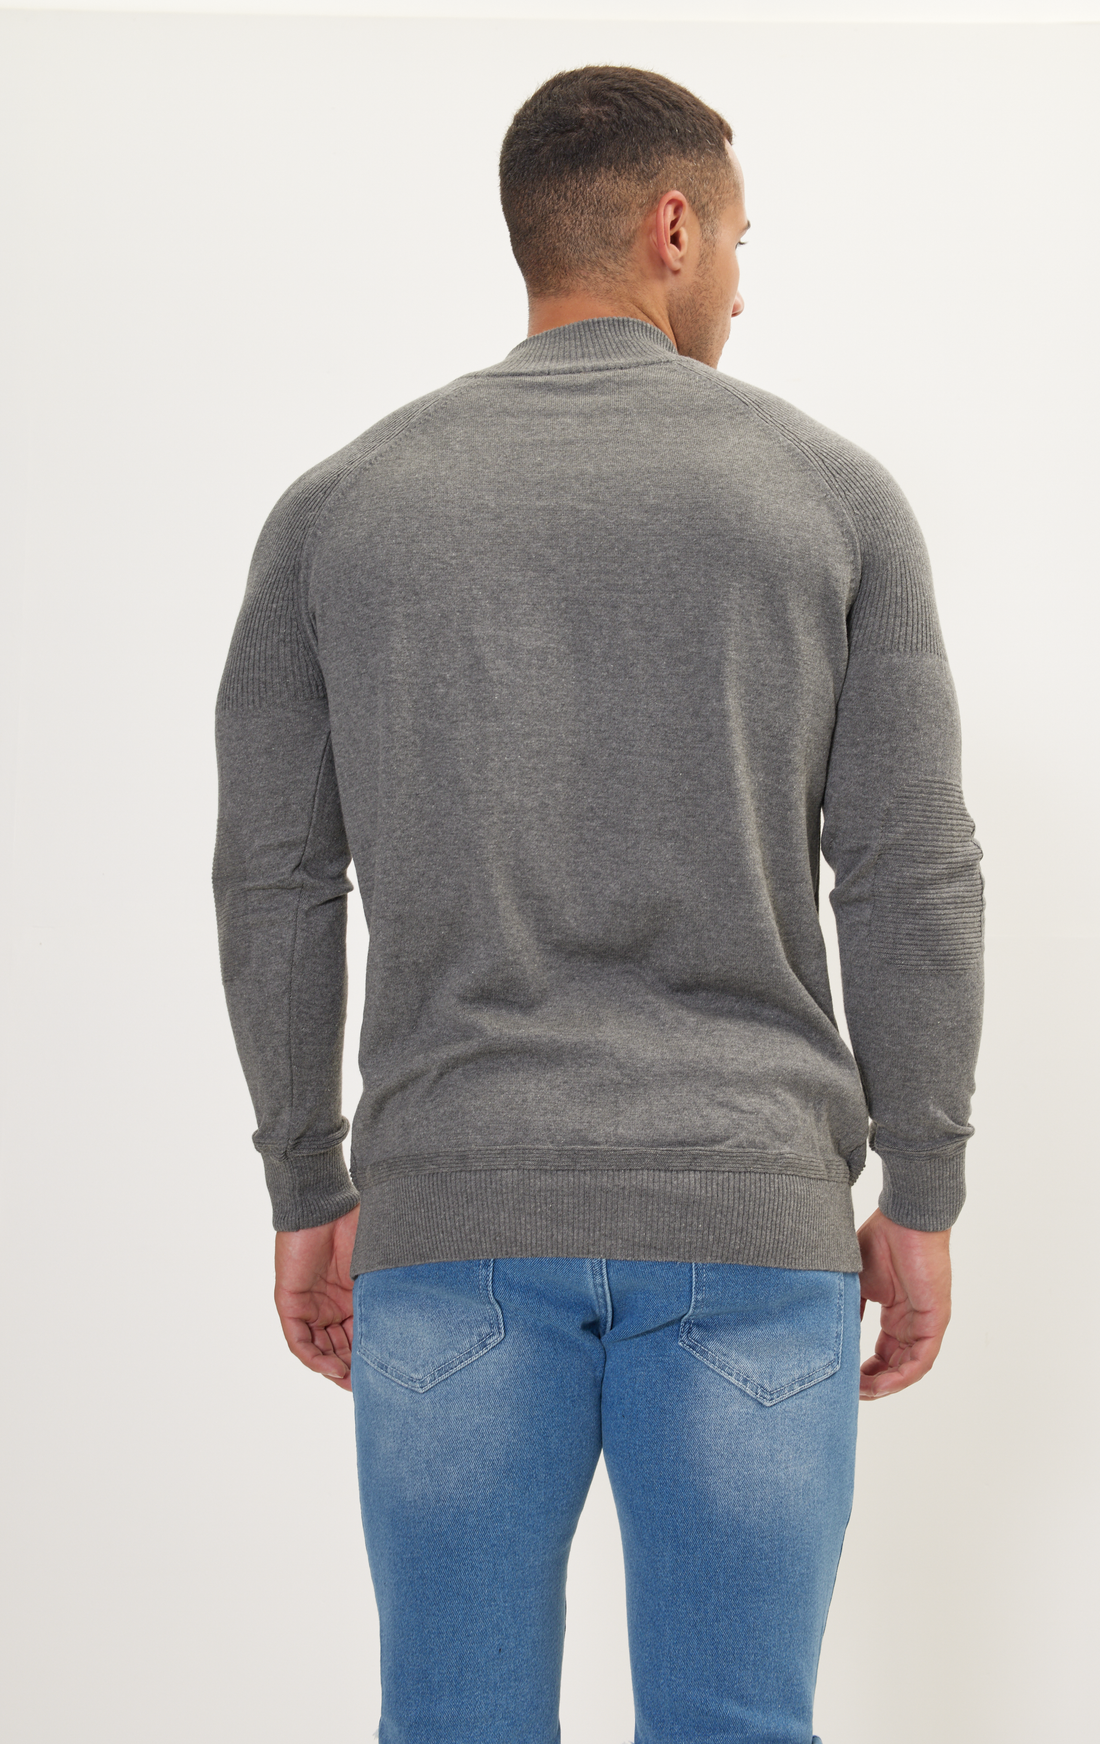 N° 6423 ANTHRACITE BLUE SWEATER